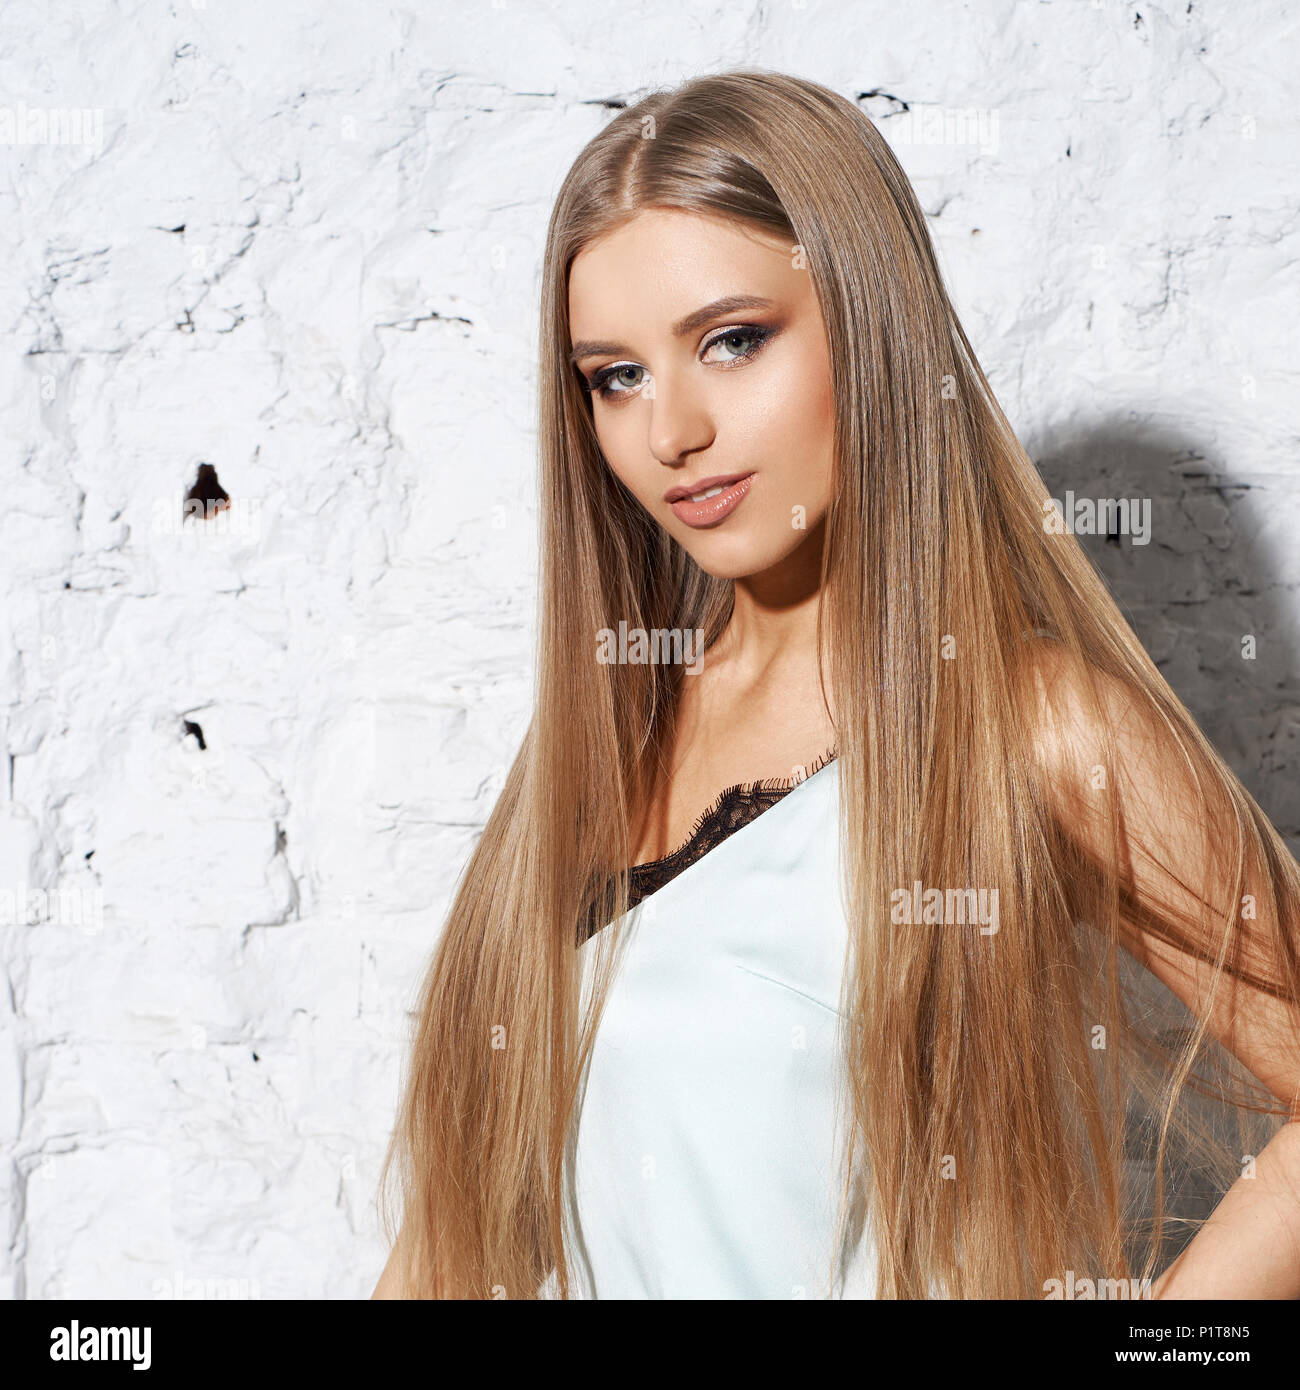 Cute girl with long straight blonde hair and healthy skin